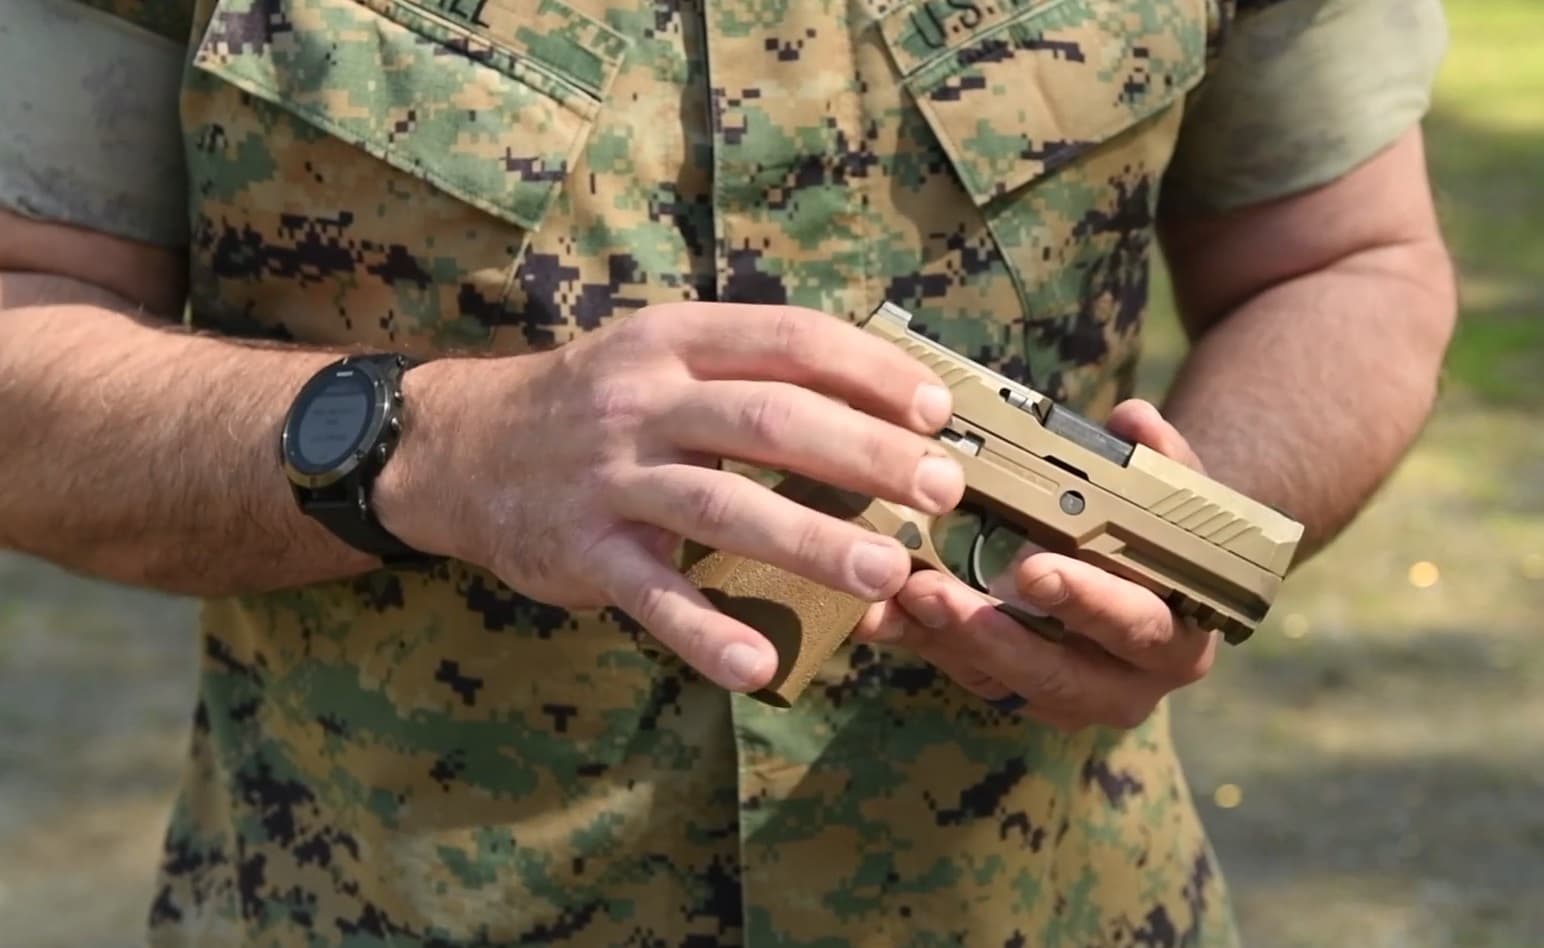 U.S. Marine Corps is set to adopt the M18 as their official duty